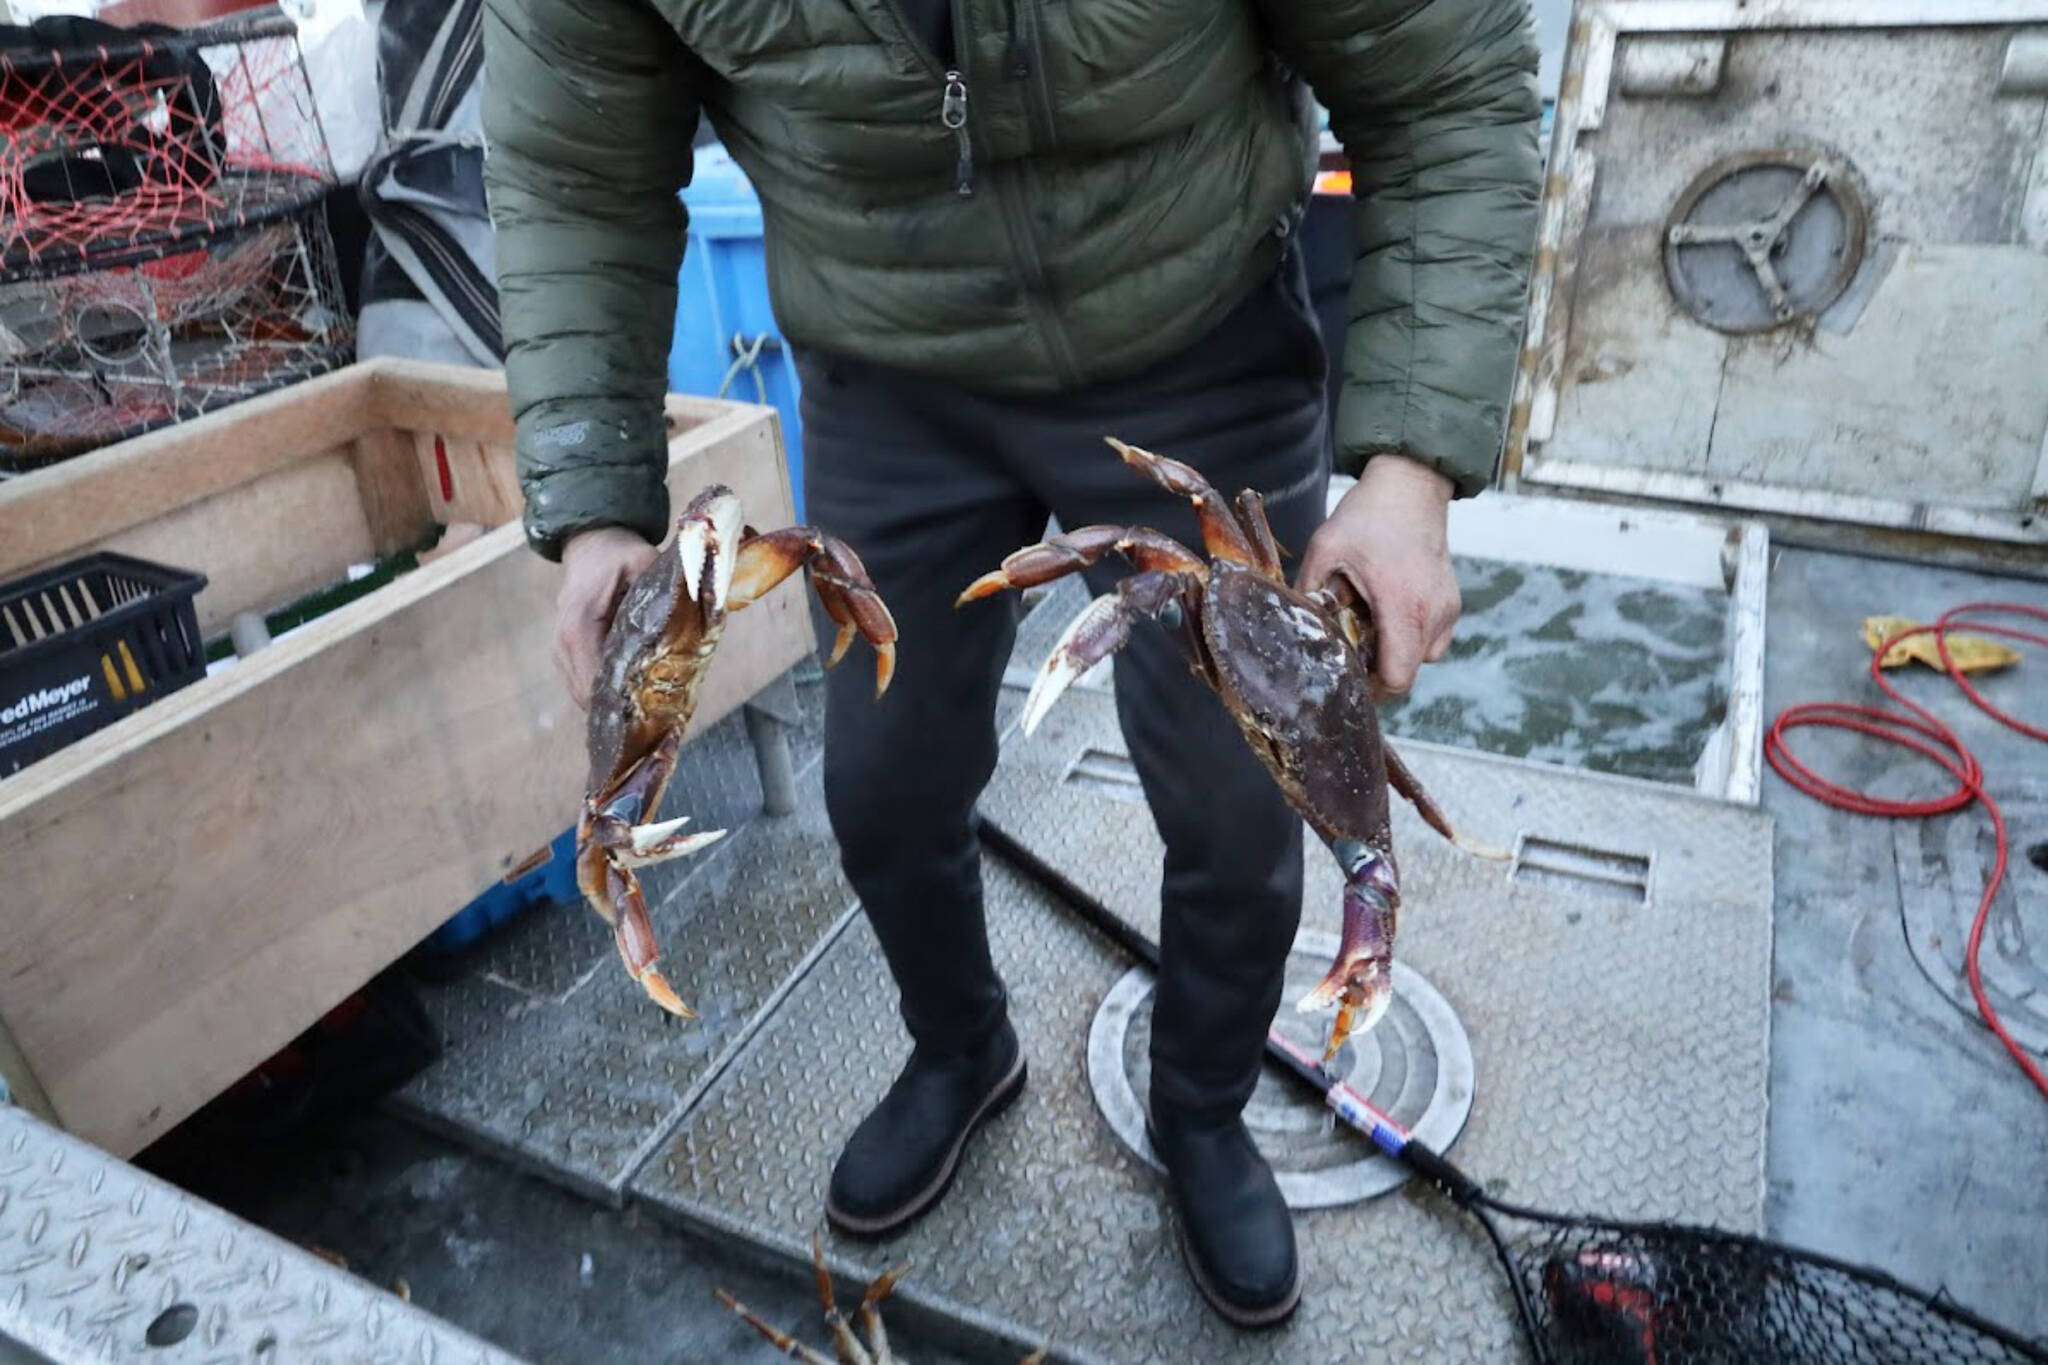 Charlie Blattner, a Juneau-based Dungeness crab fisherman, holds two live Dungeness crabs he caught in the past few days around the Juneau area. Blattner said fall Dungeness crab harvest for his boat has been “hit or miss.” (Clarise Larson / Juneau Empire)